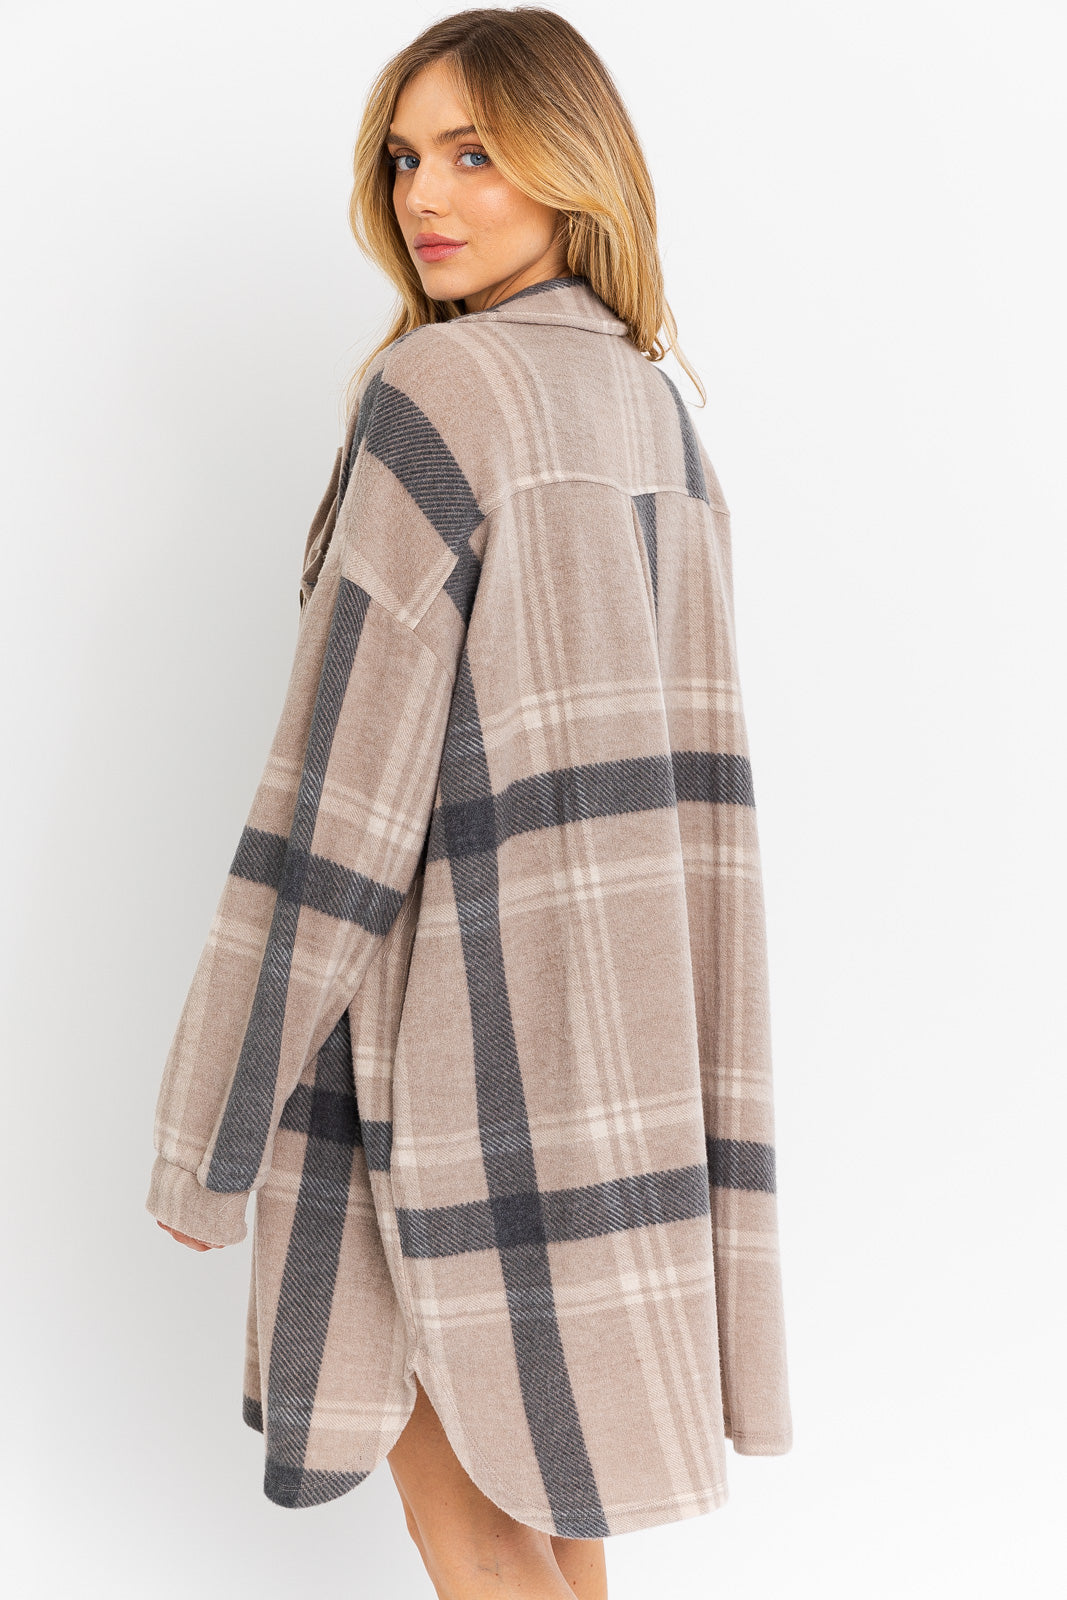 CHILLY & COOL LONG PLAID FLANNEL